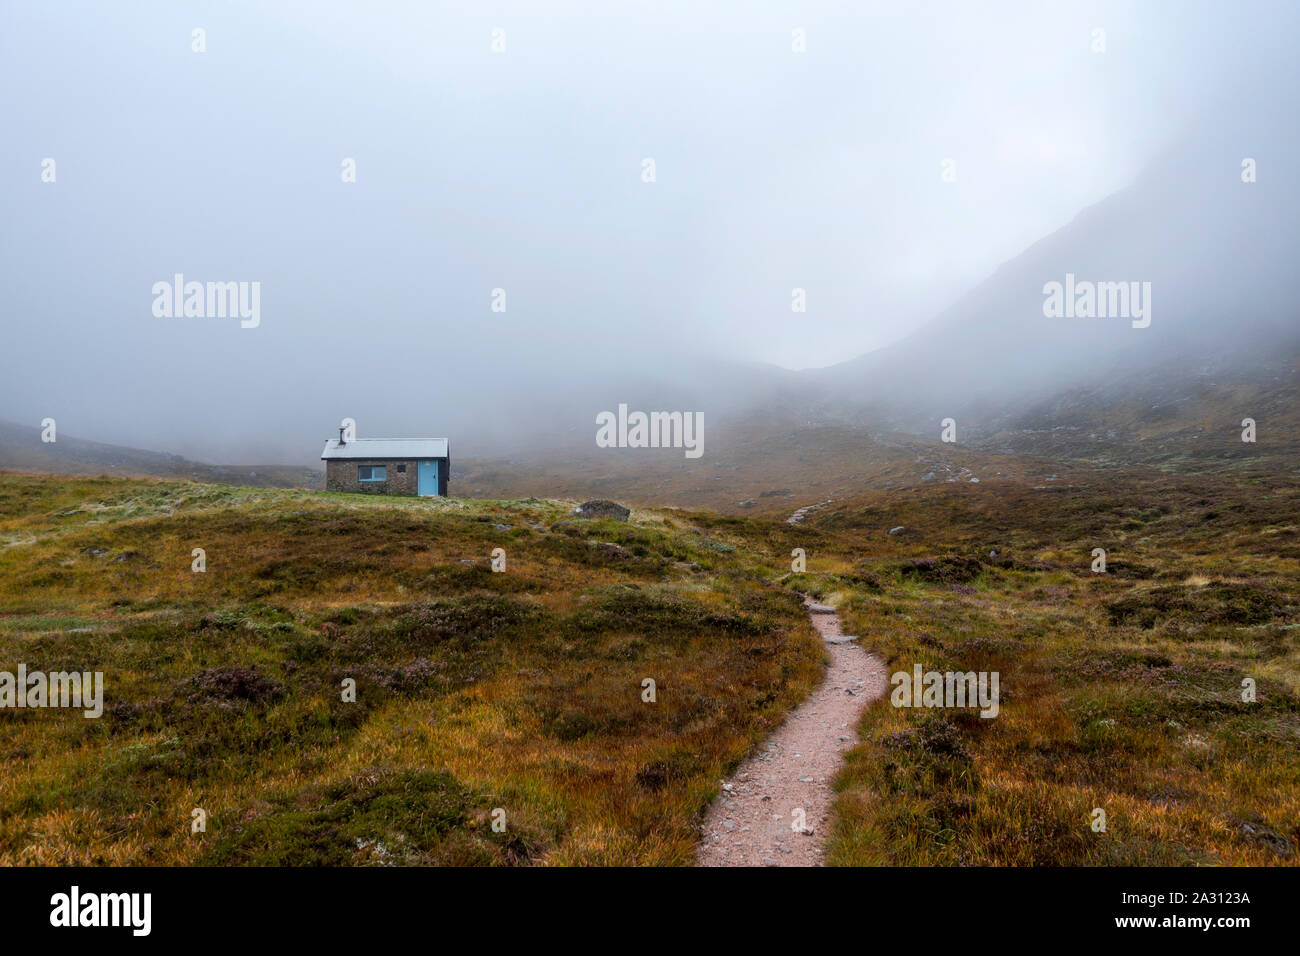 Hutchison Memorial Hut bothy on Glen Derry route in the Cairngorms National Park that takes you up to Ben Macdui the highest mountain in the park. Stock Photo